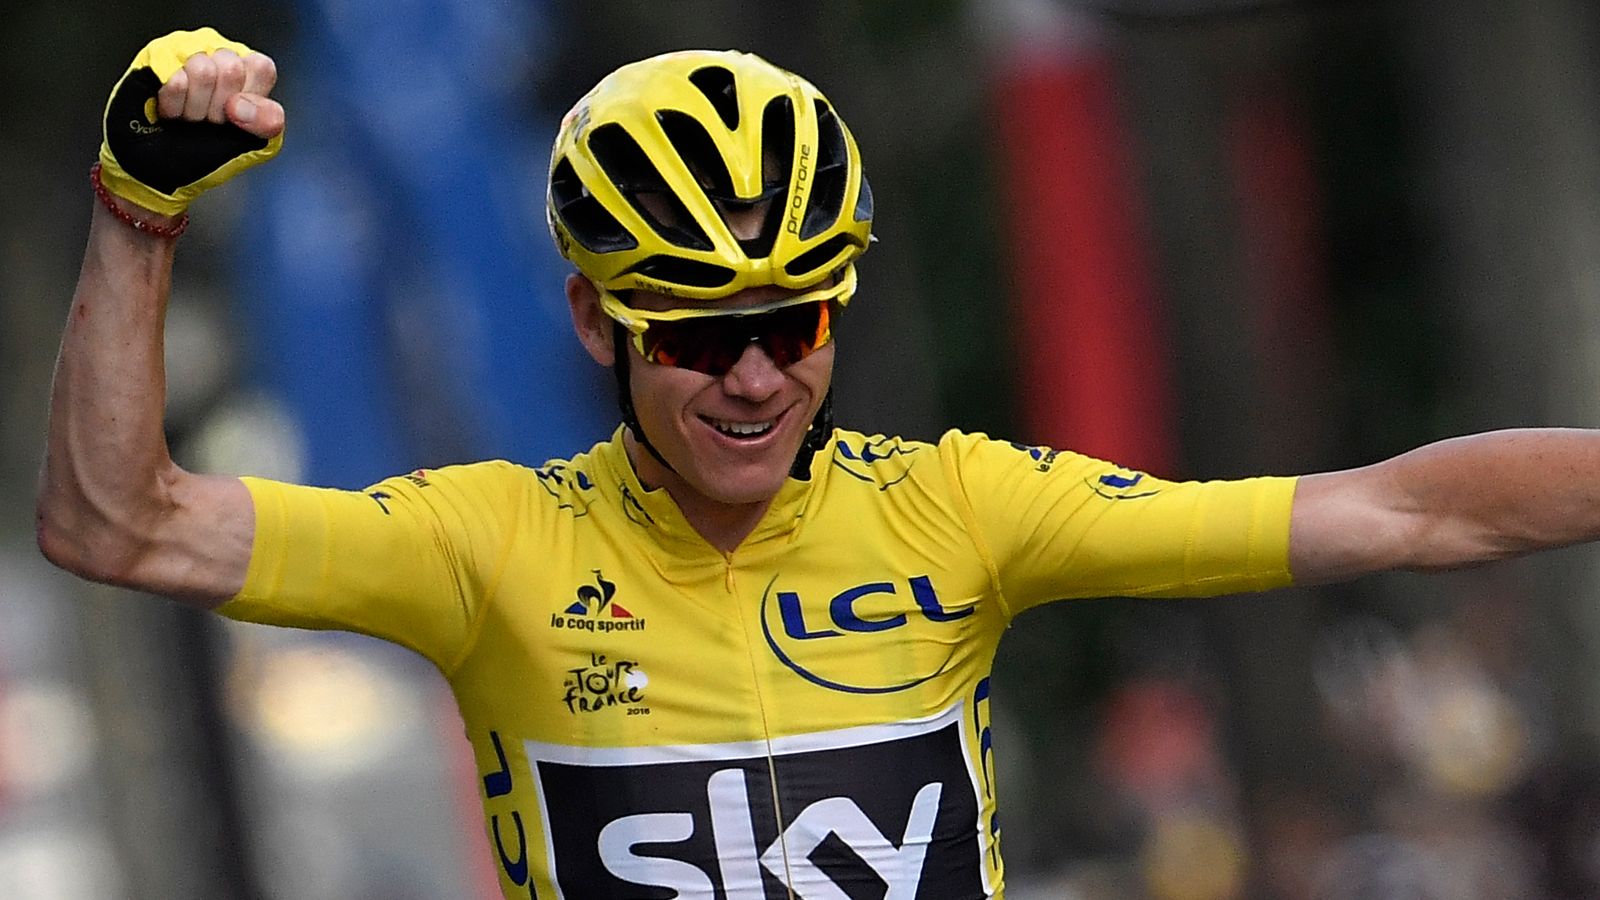 Tour de France Chris Froome says third win was as good as his first